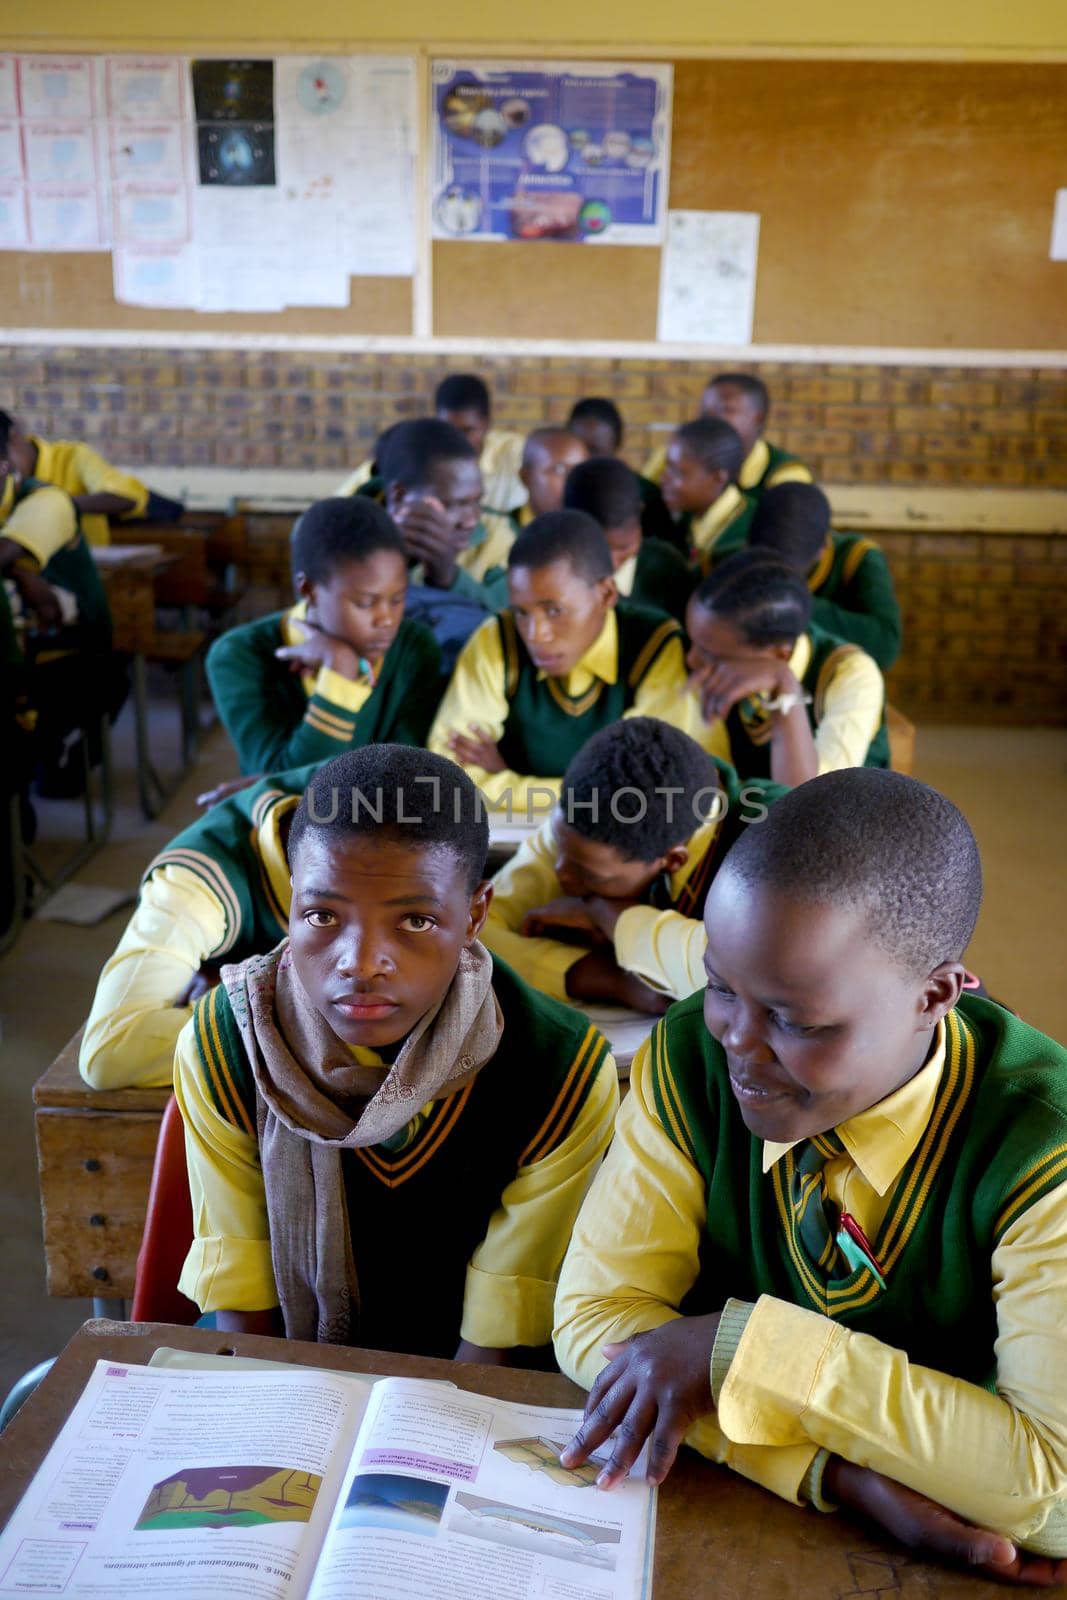 Children crammed into an overcrowded classroom in South Africa by fivepointsix